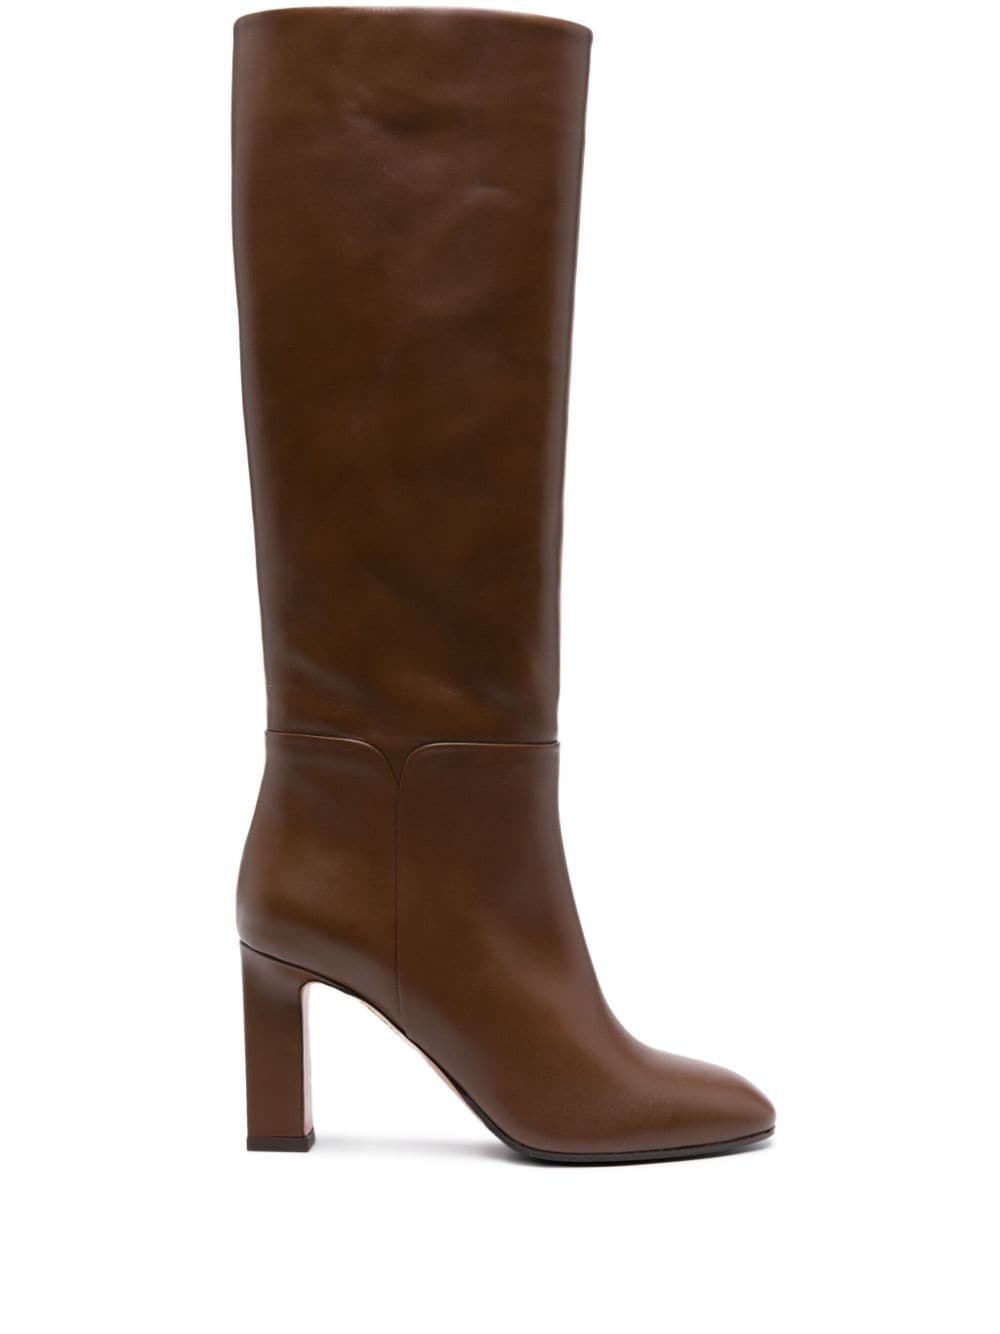 Sellier 85mm leather boots - 1